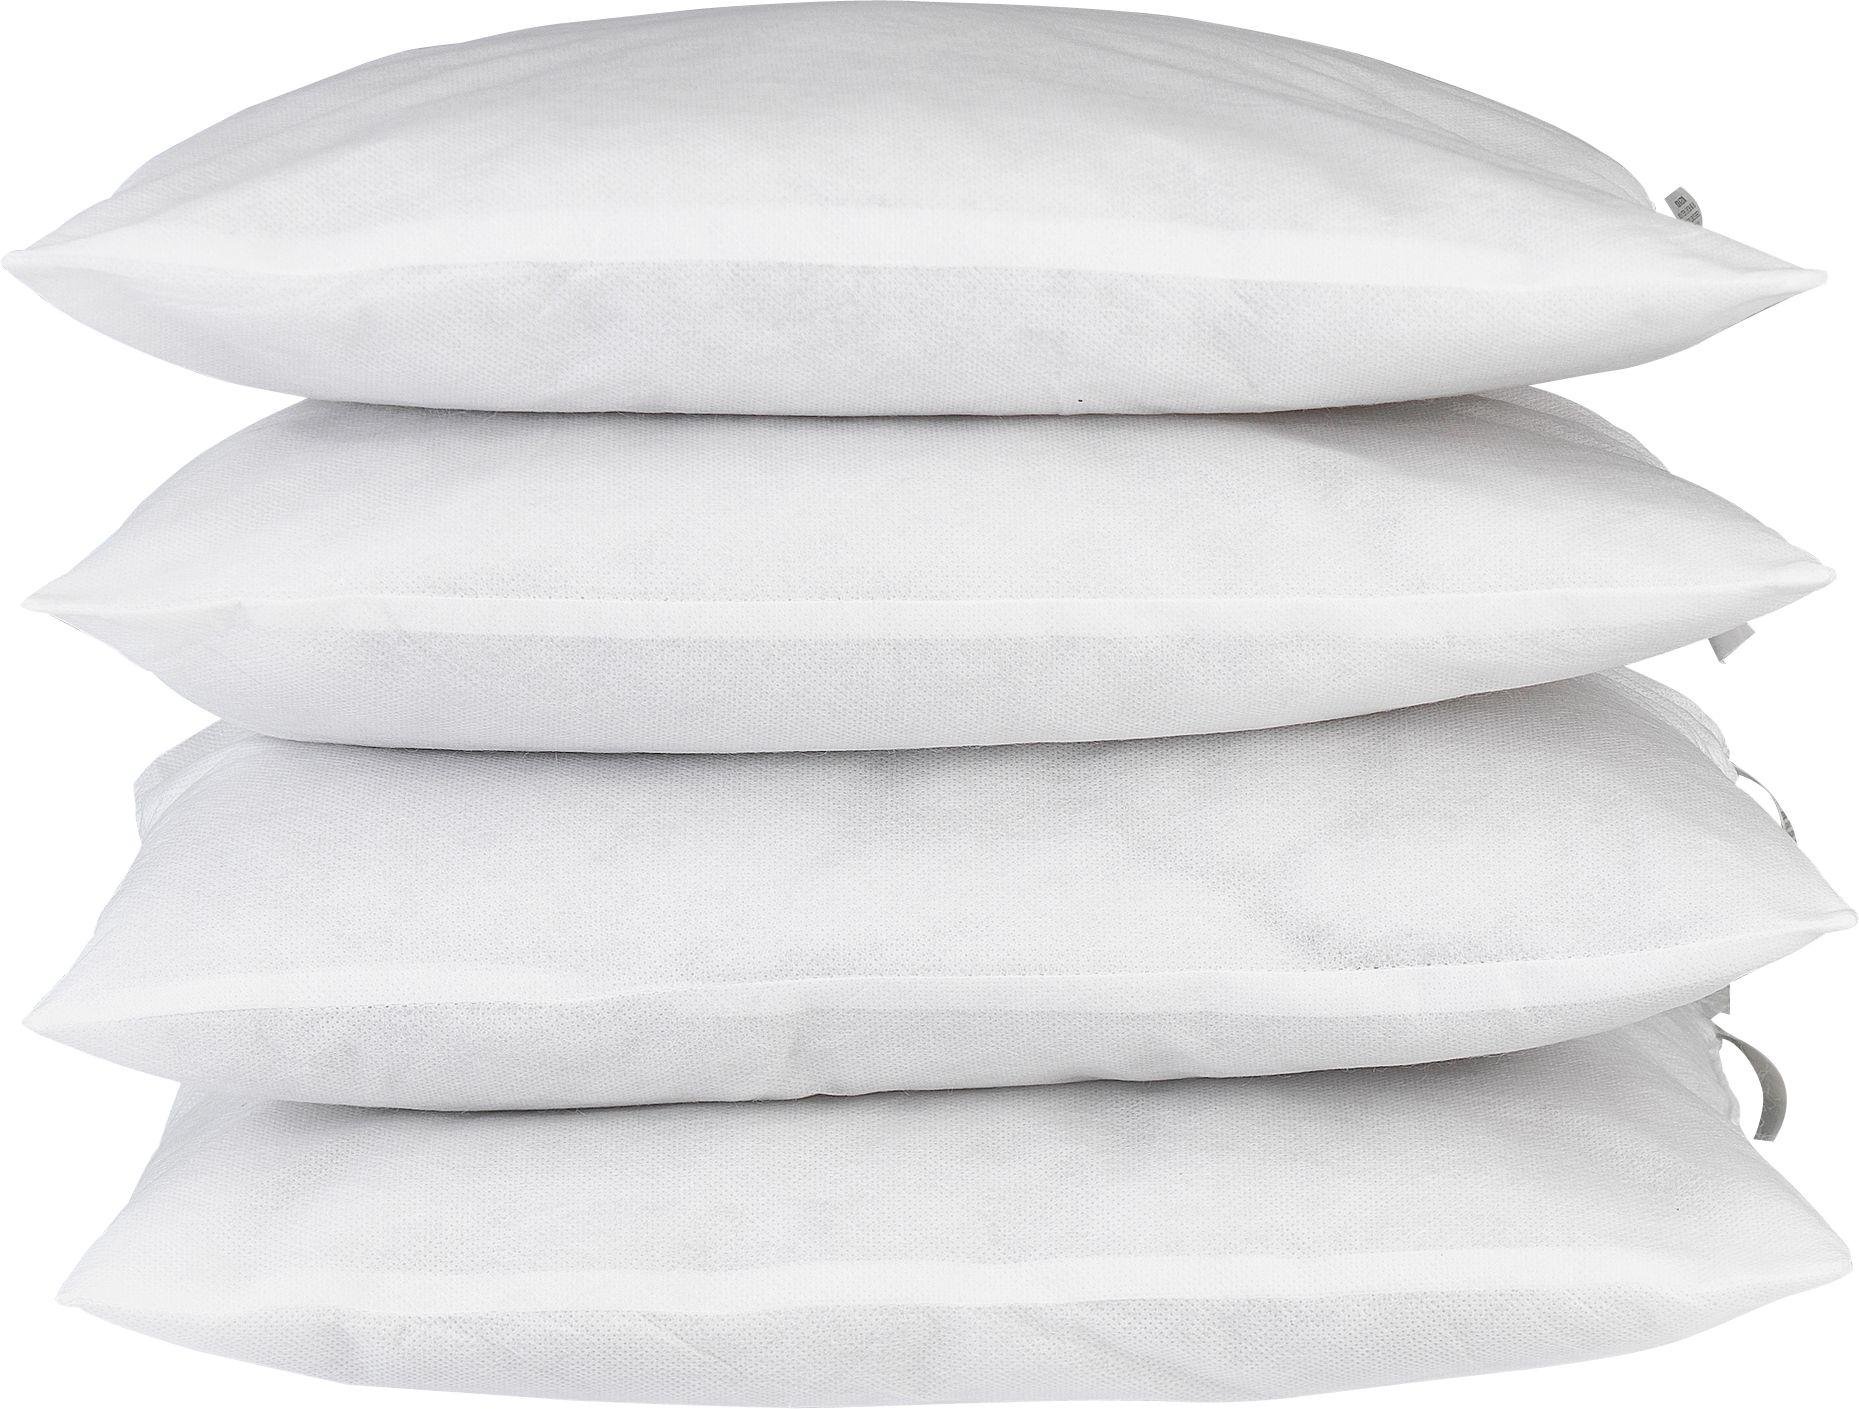 Argos Home Pack of 4 Cushion Pads - 43 x 43cm Reviews